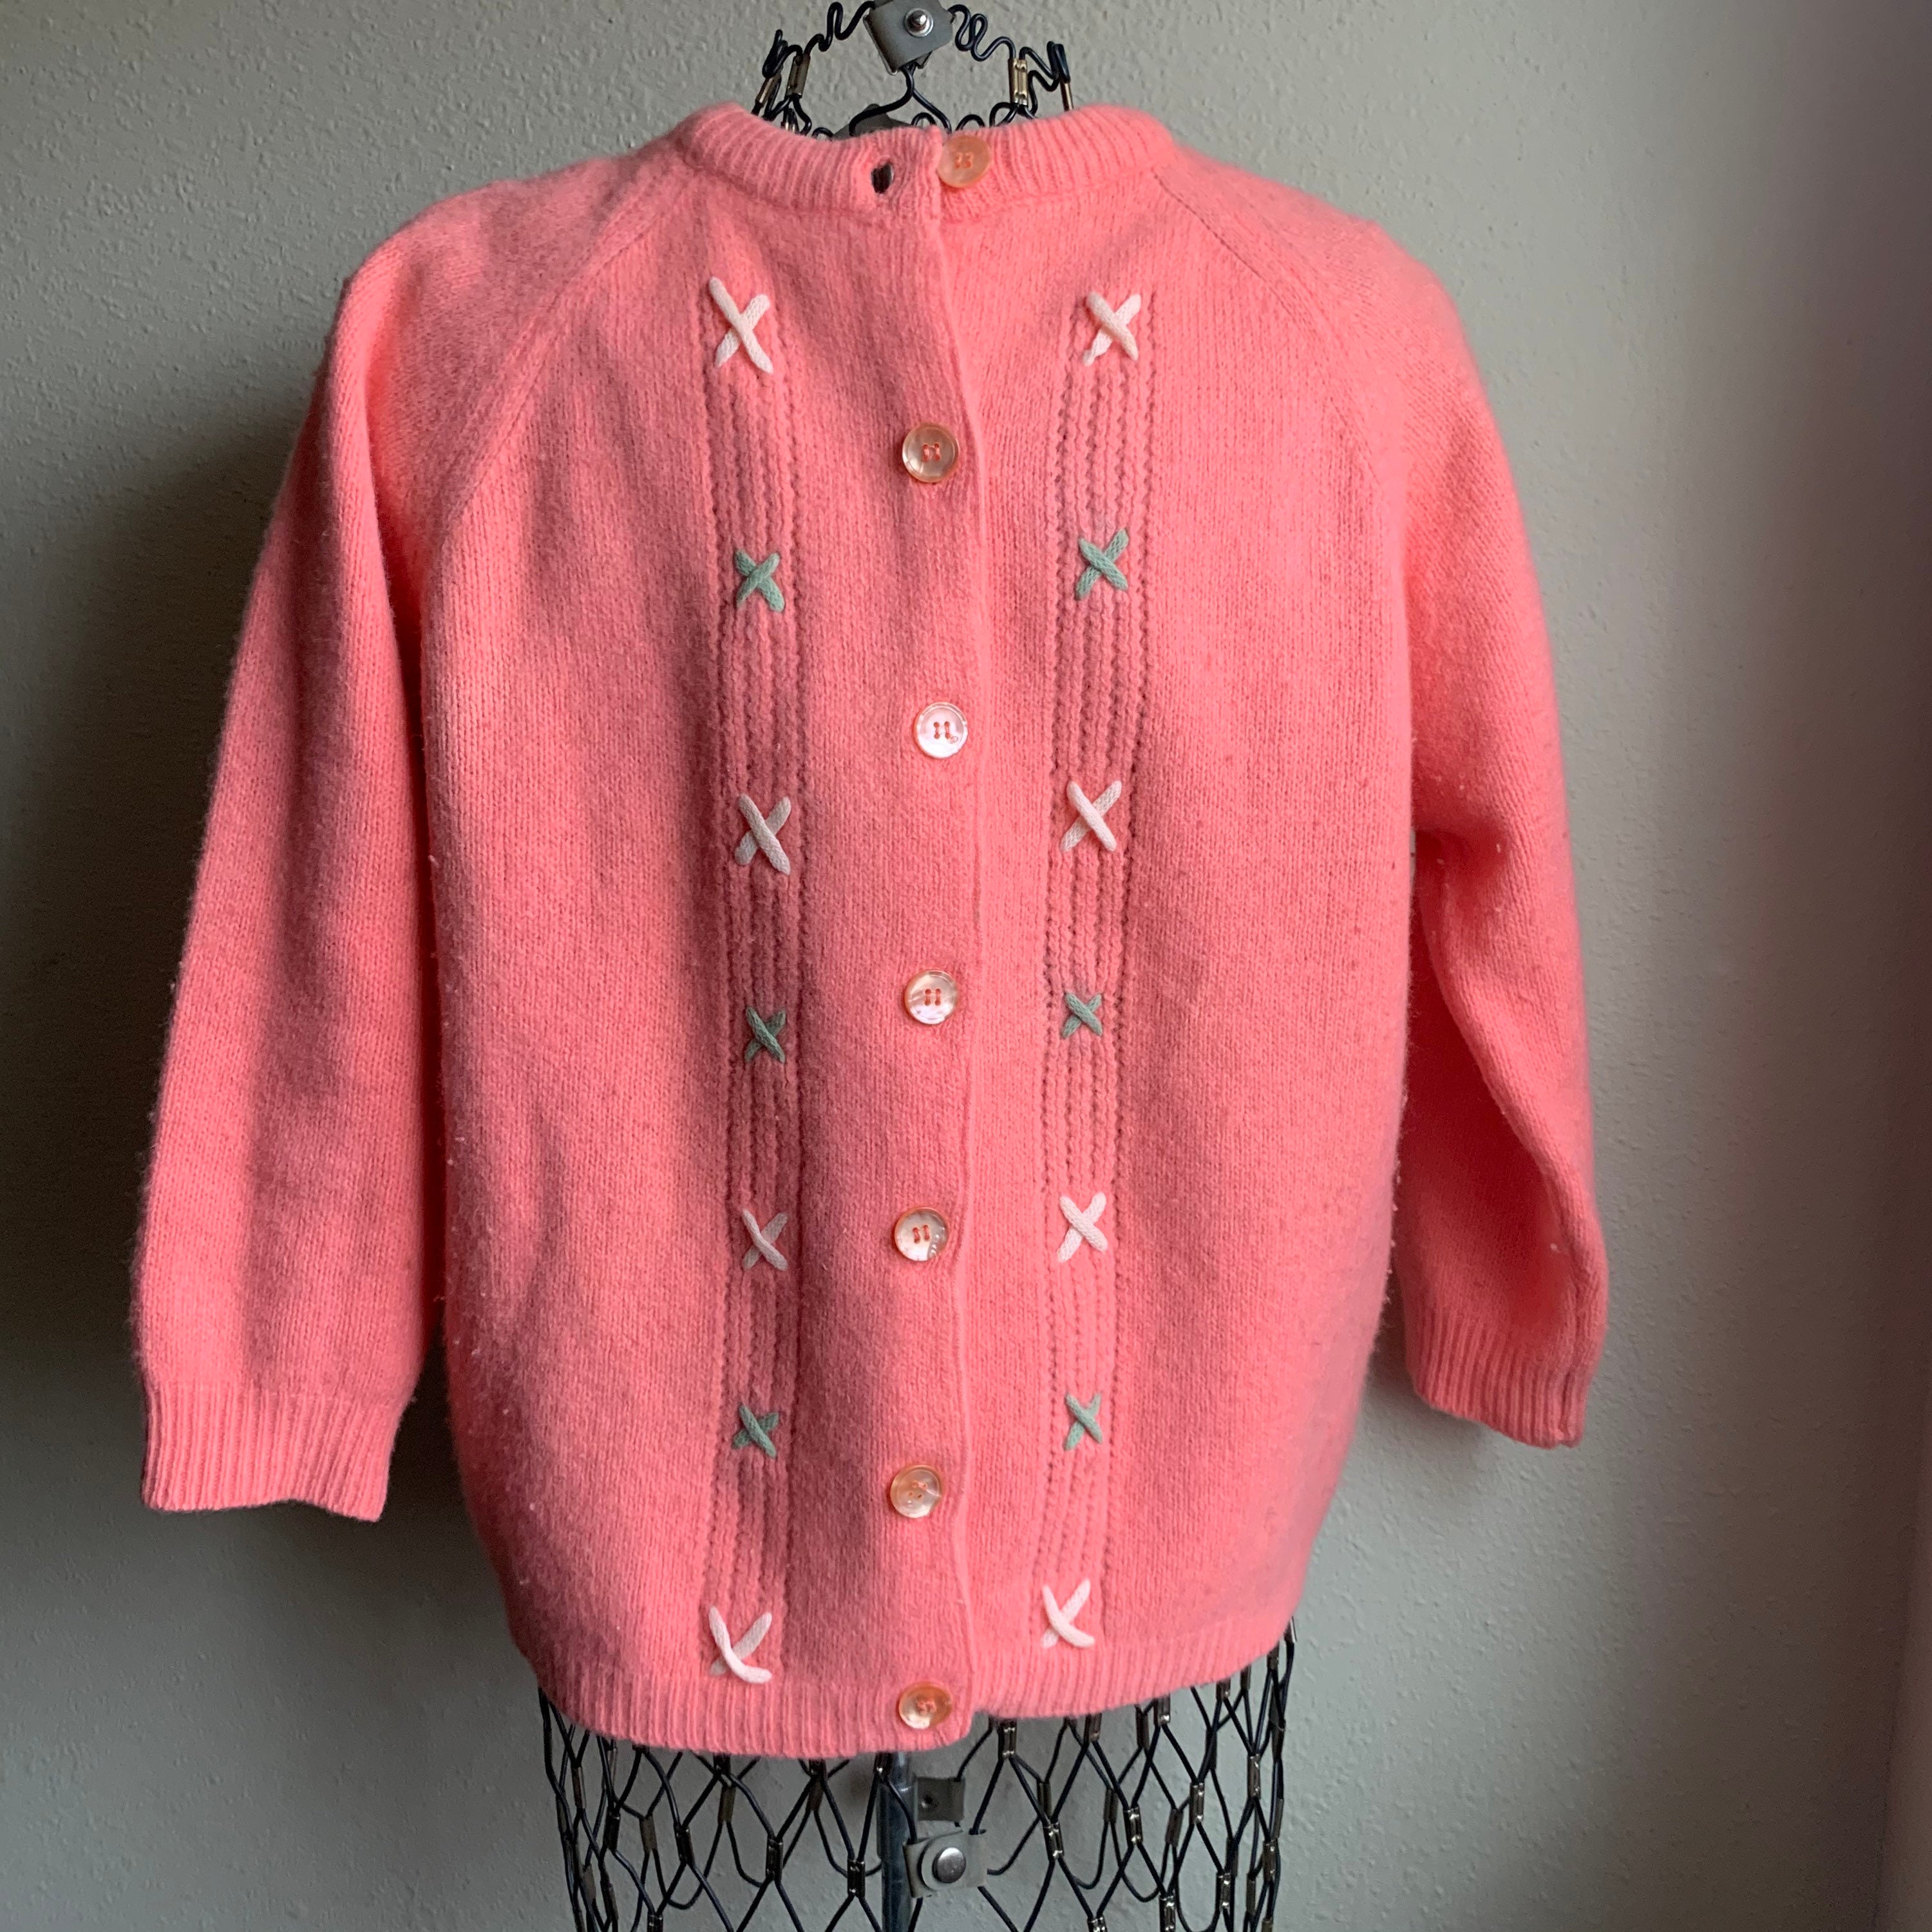 Vintage Bobby Brook's Lamb's Wool Blend Knit Pink Button Up Cardigan Sweater Women's Small